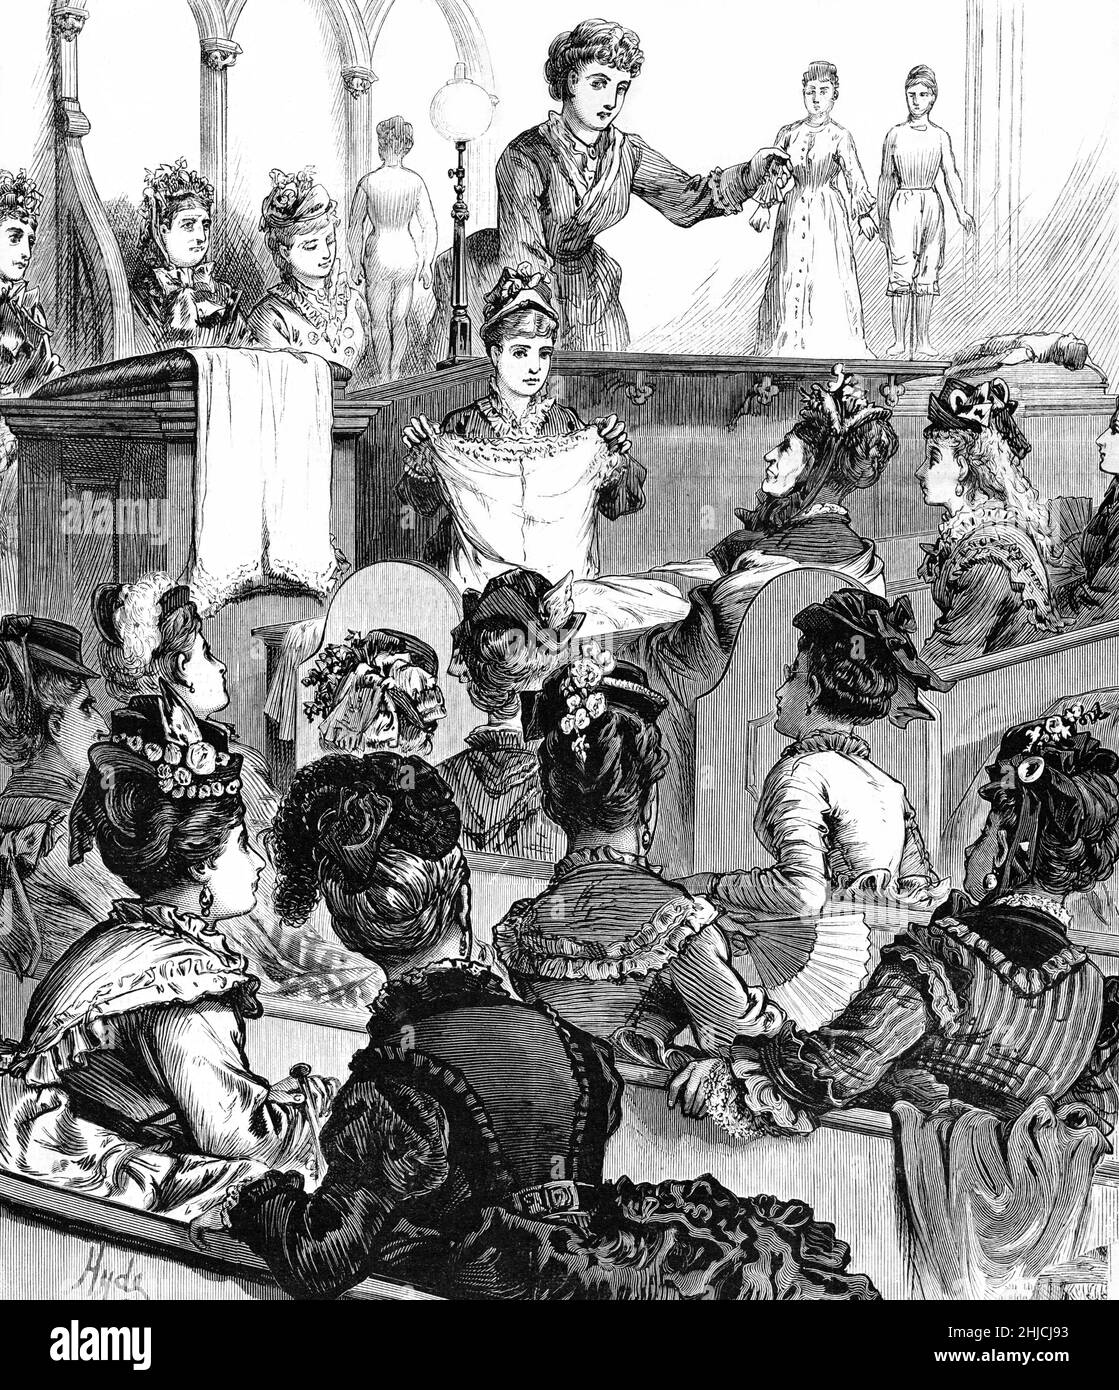 Women displaying comfortable women's undergarments to a female audience at the Ladies' Dress Reform Convention, Freeman Place Chapel, Boston, MA. Sketched by E.R. Morse and engraved by John N. Hyde. Frank Leslie's Illustrated Newspaper, 1874. The dress reform movement advocated for looser and more athletic undergarments for women and rejected the unhealthy corset. Stock Photo